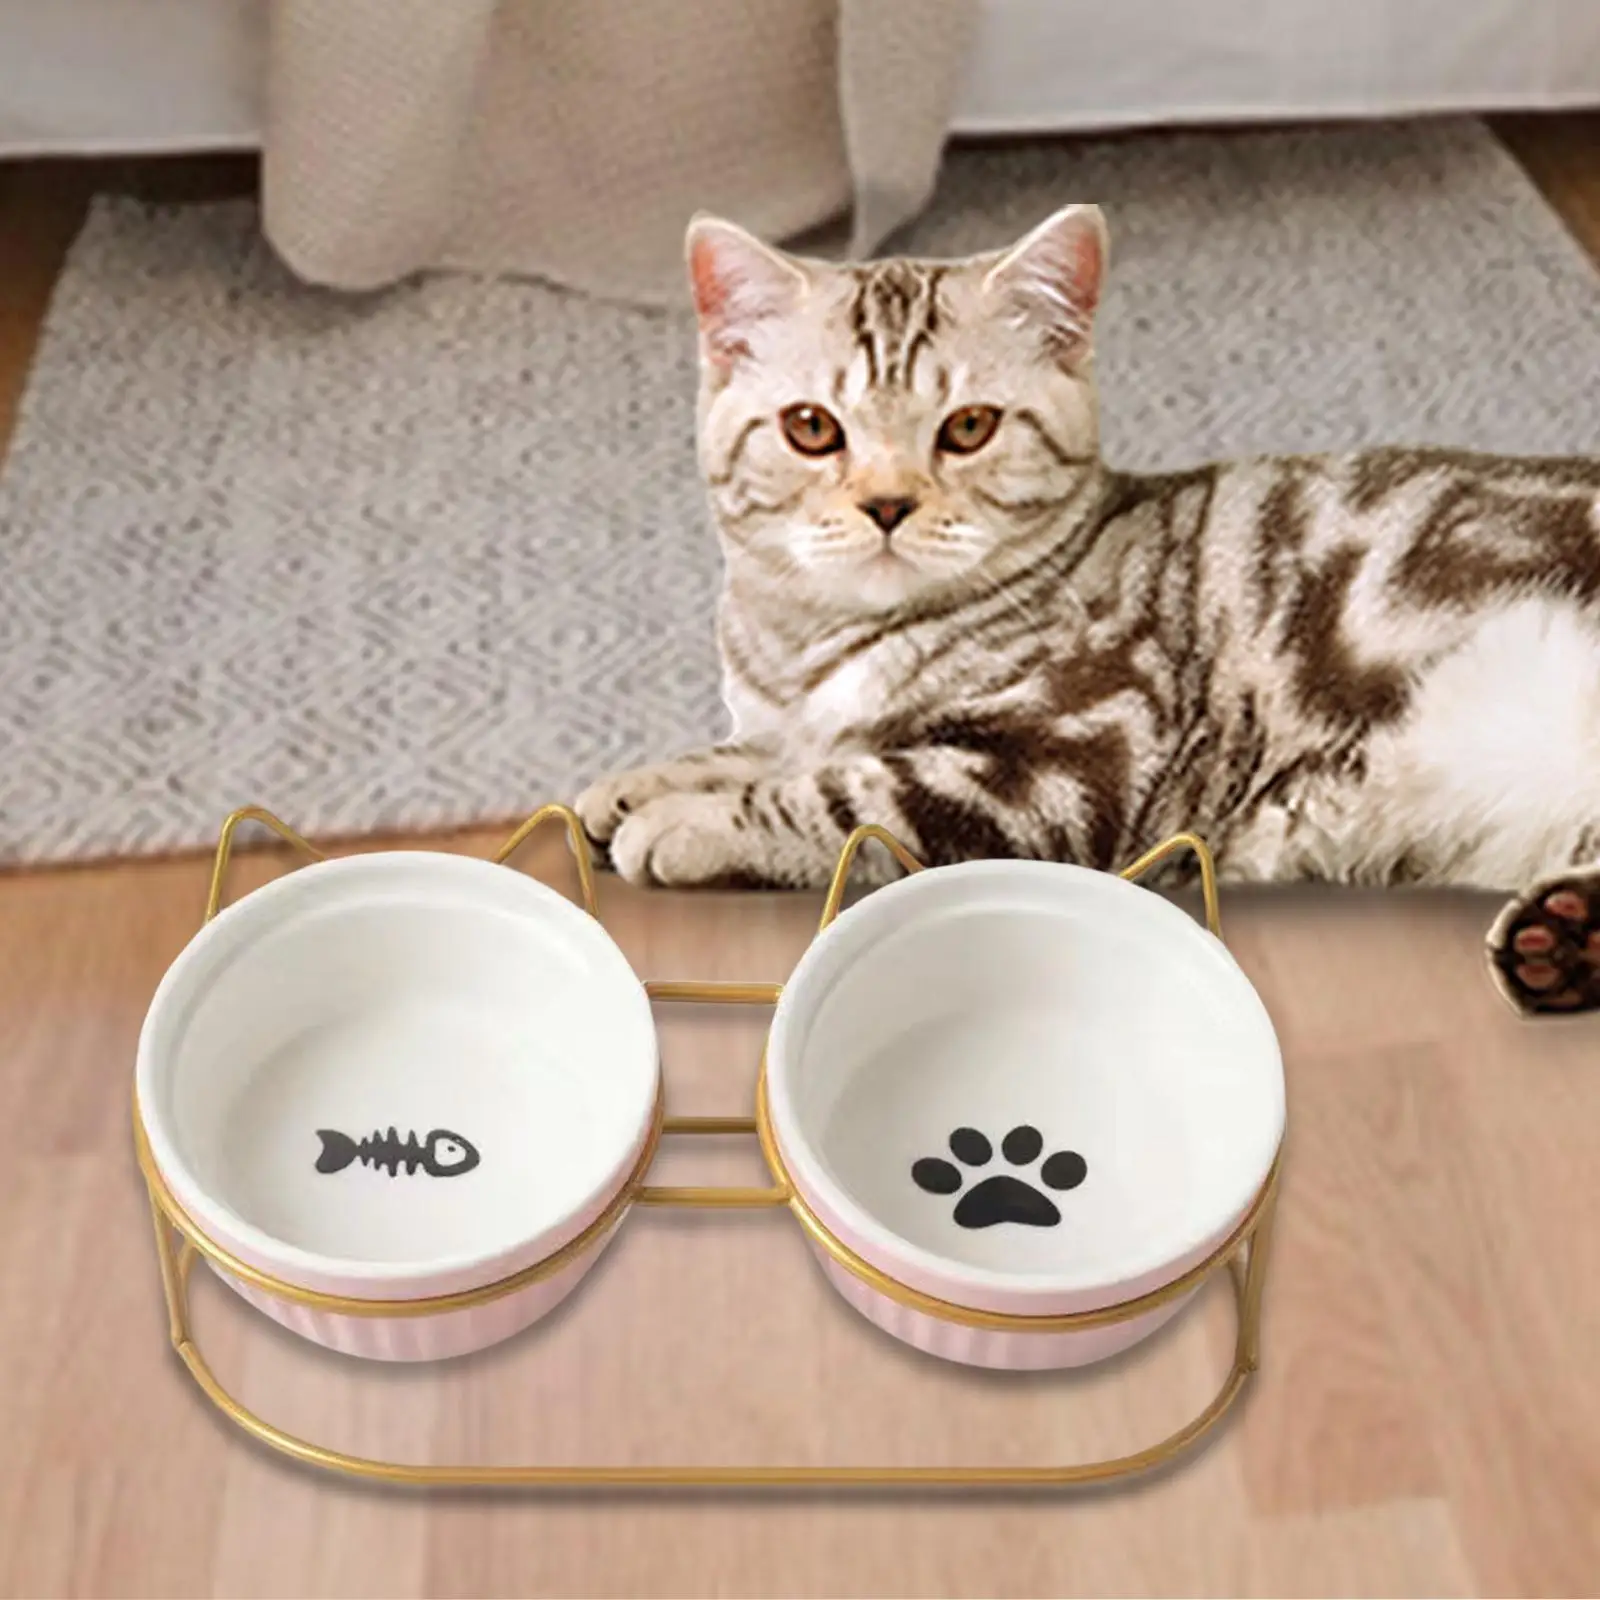 Porcelain Pet Bowls Elevated Cat Dishes Removable Cat Feeder Washable Stable Water Bowls Large Capacity Cute for Flat Faced Cats